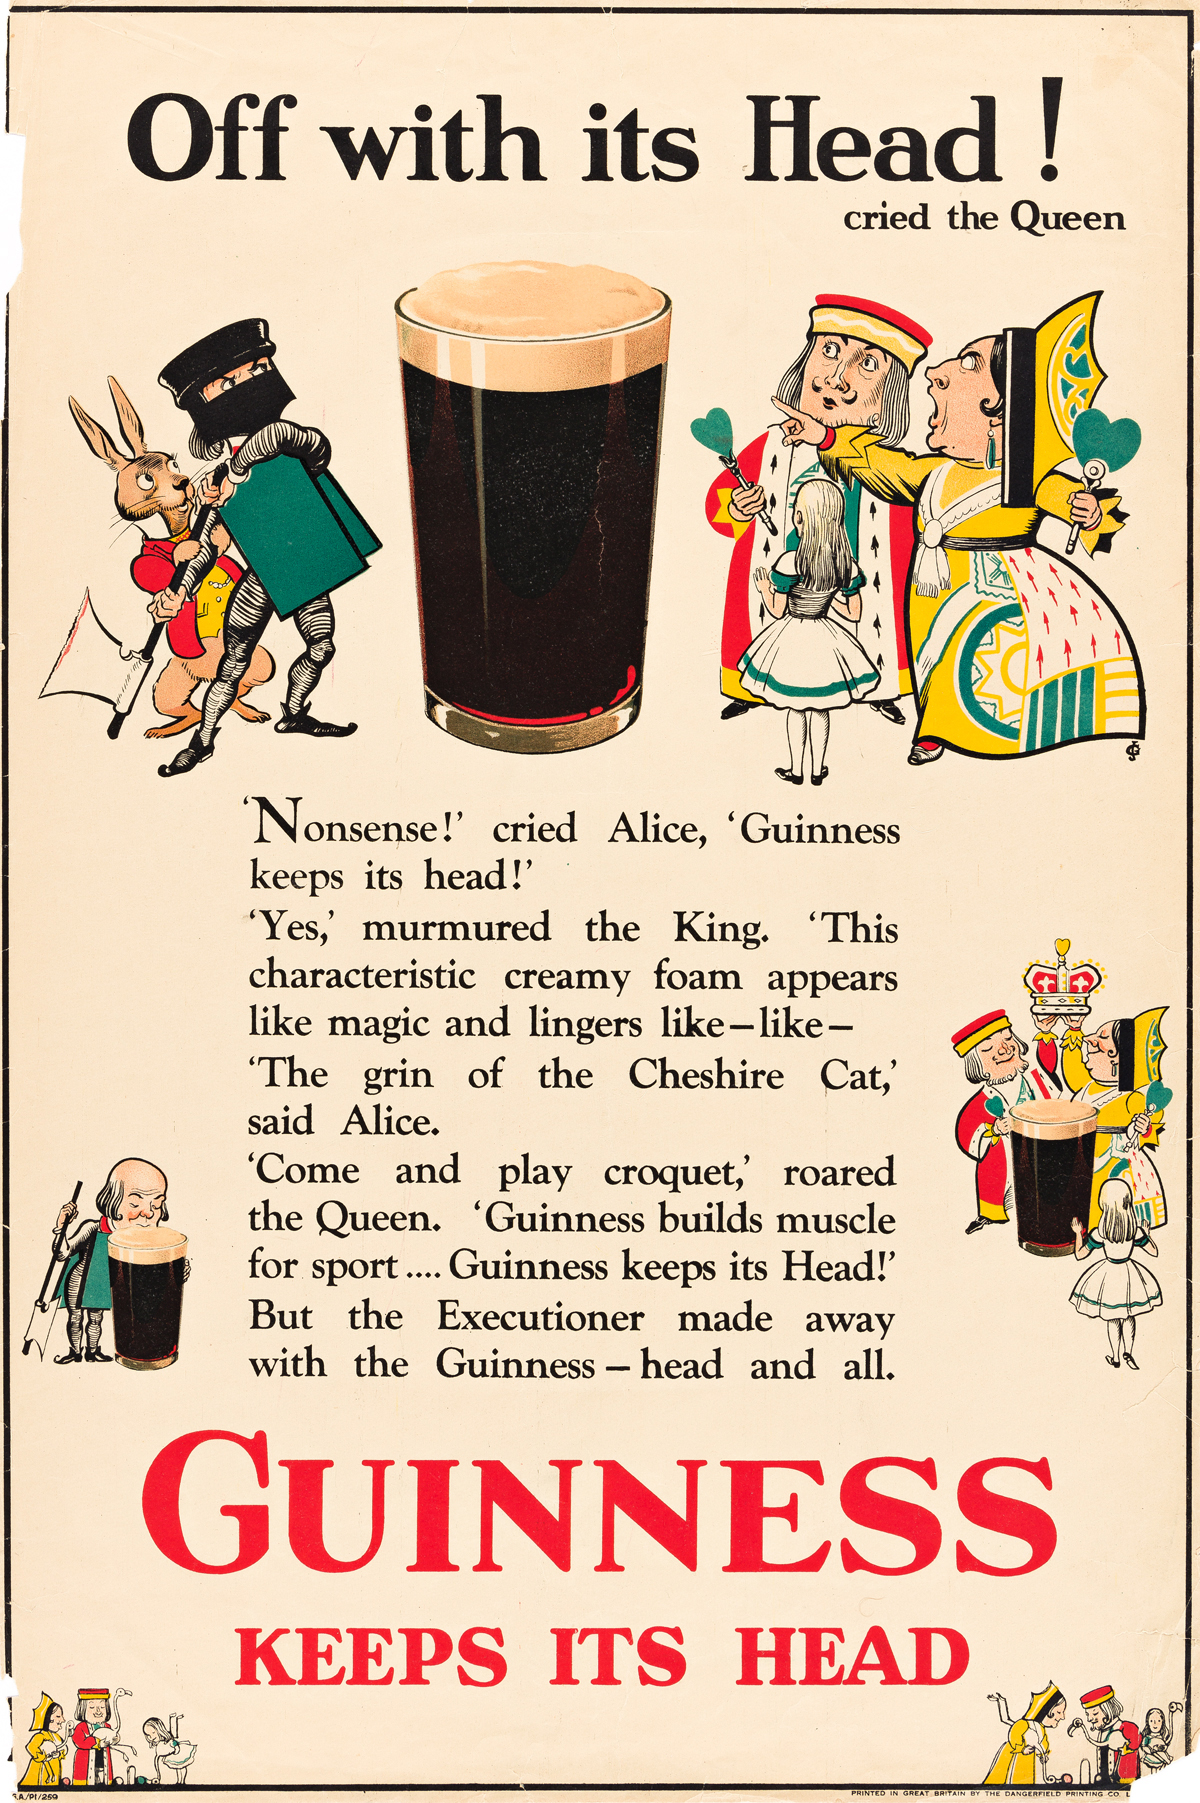 JOHN GILROY (1898-1985).  OFF WITH HIS HEAD! / GUINNESS KEEPS ITS HEAD. 1930. 30x20 inches, 76x50 cm. The Dangerfield Printing Company,